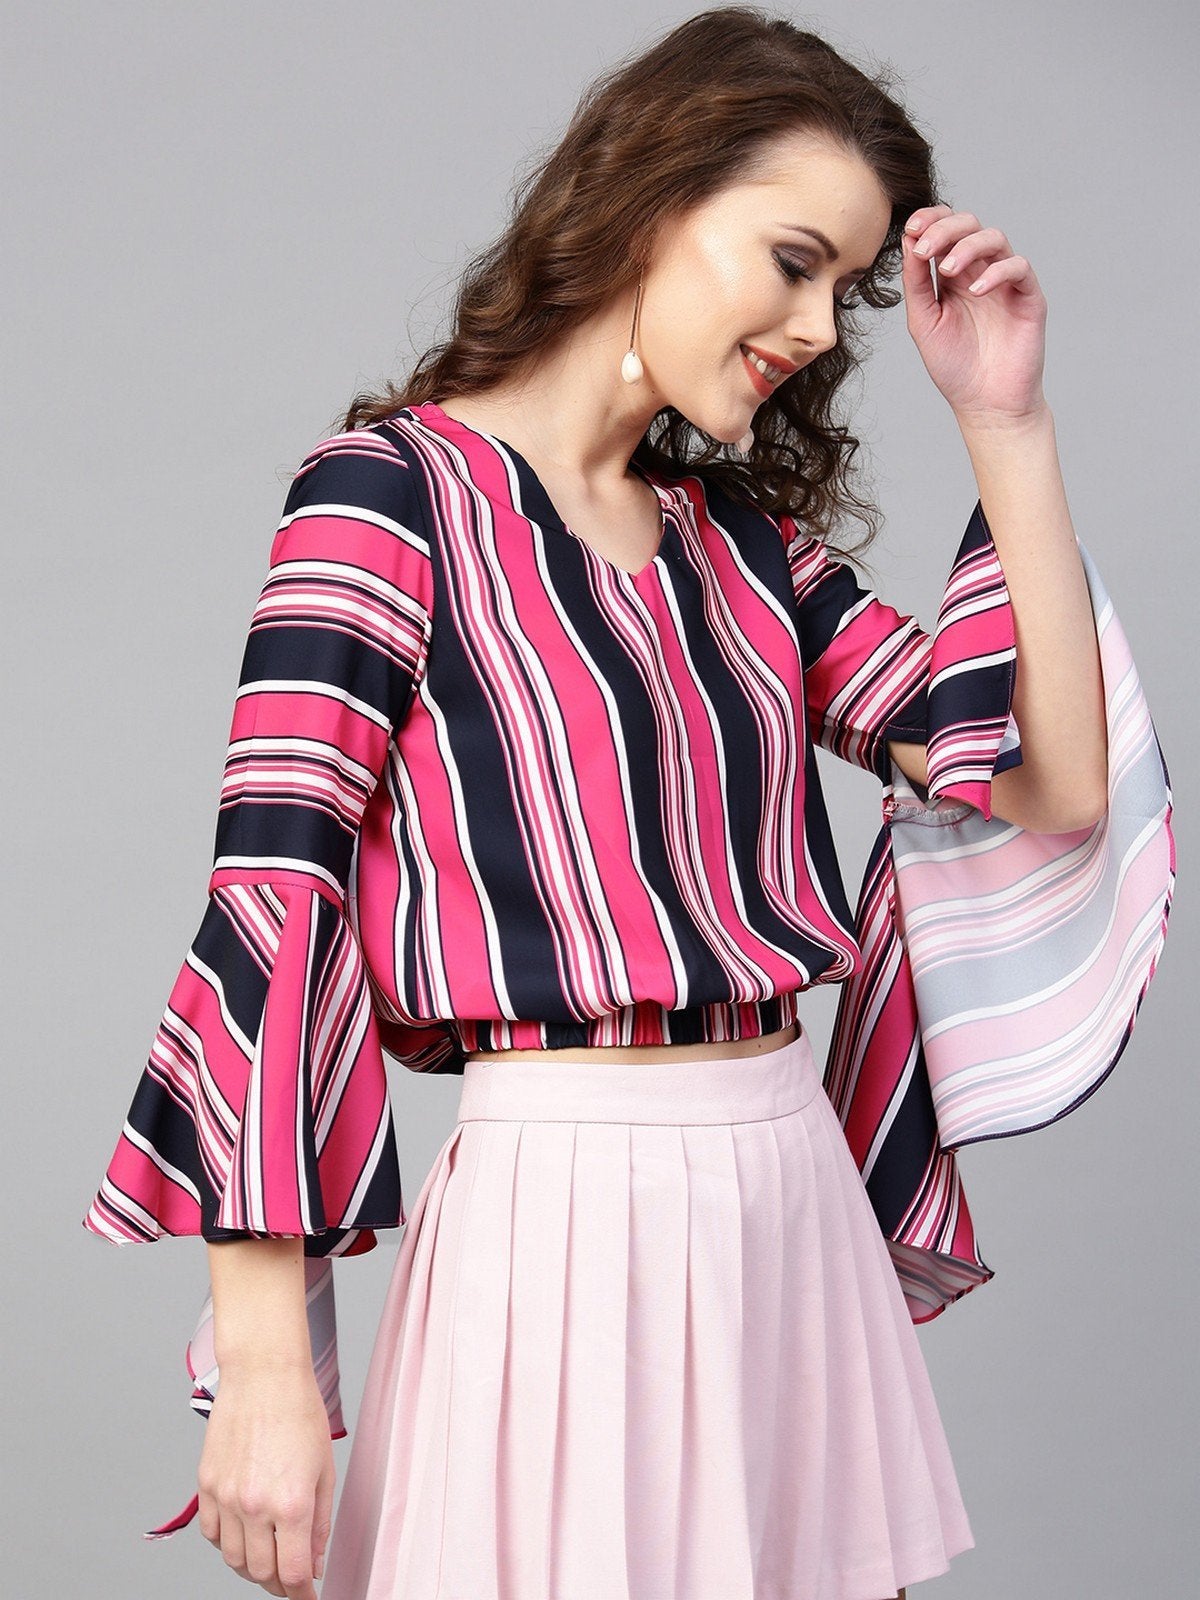 Women's Printed Stripes Bell Sleeves Top - Pannkh